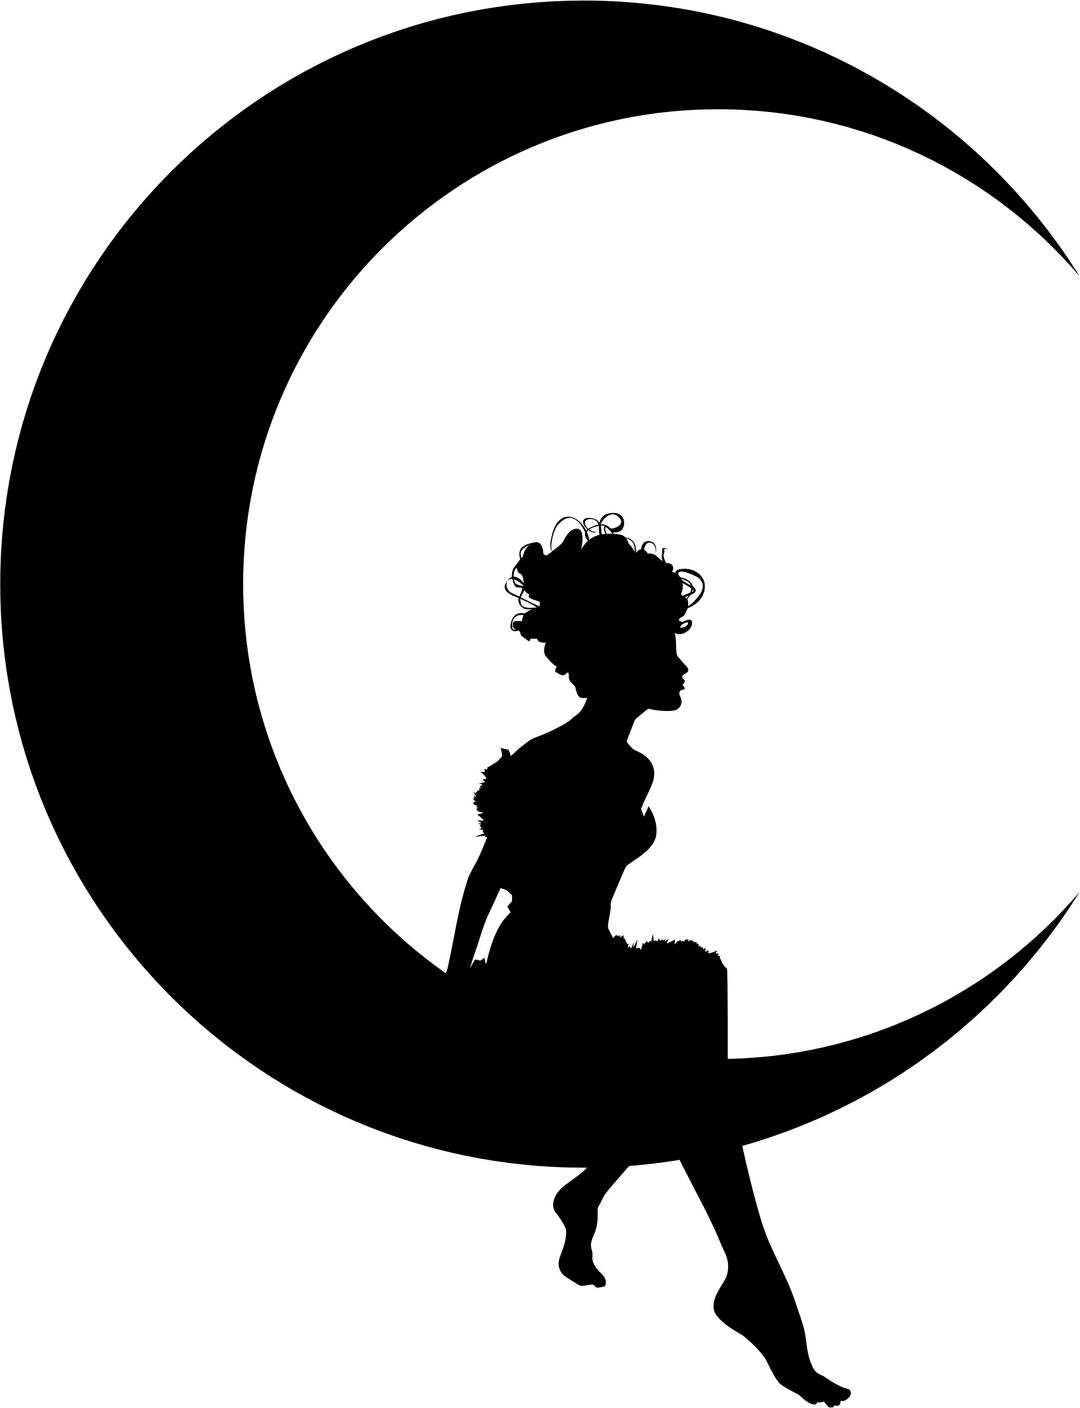 Fairy Sitting on Moon Crescent png transparent